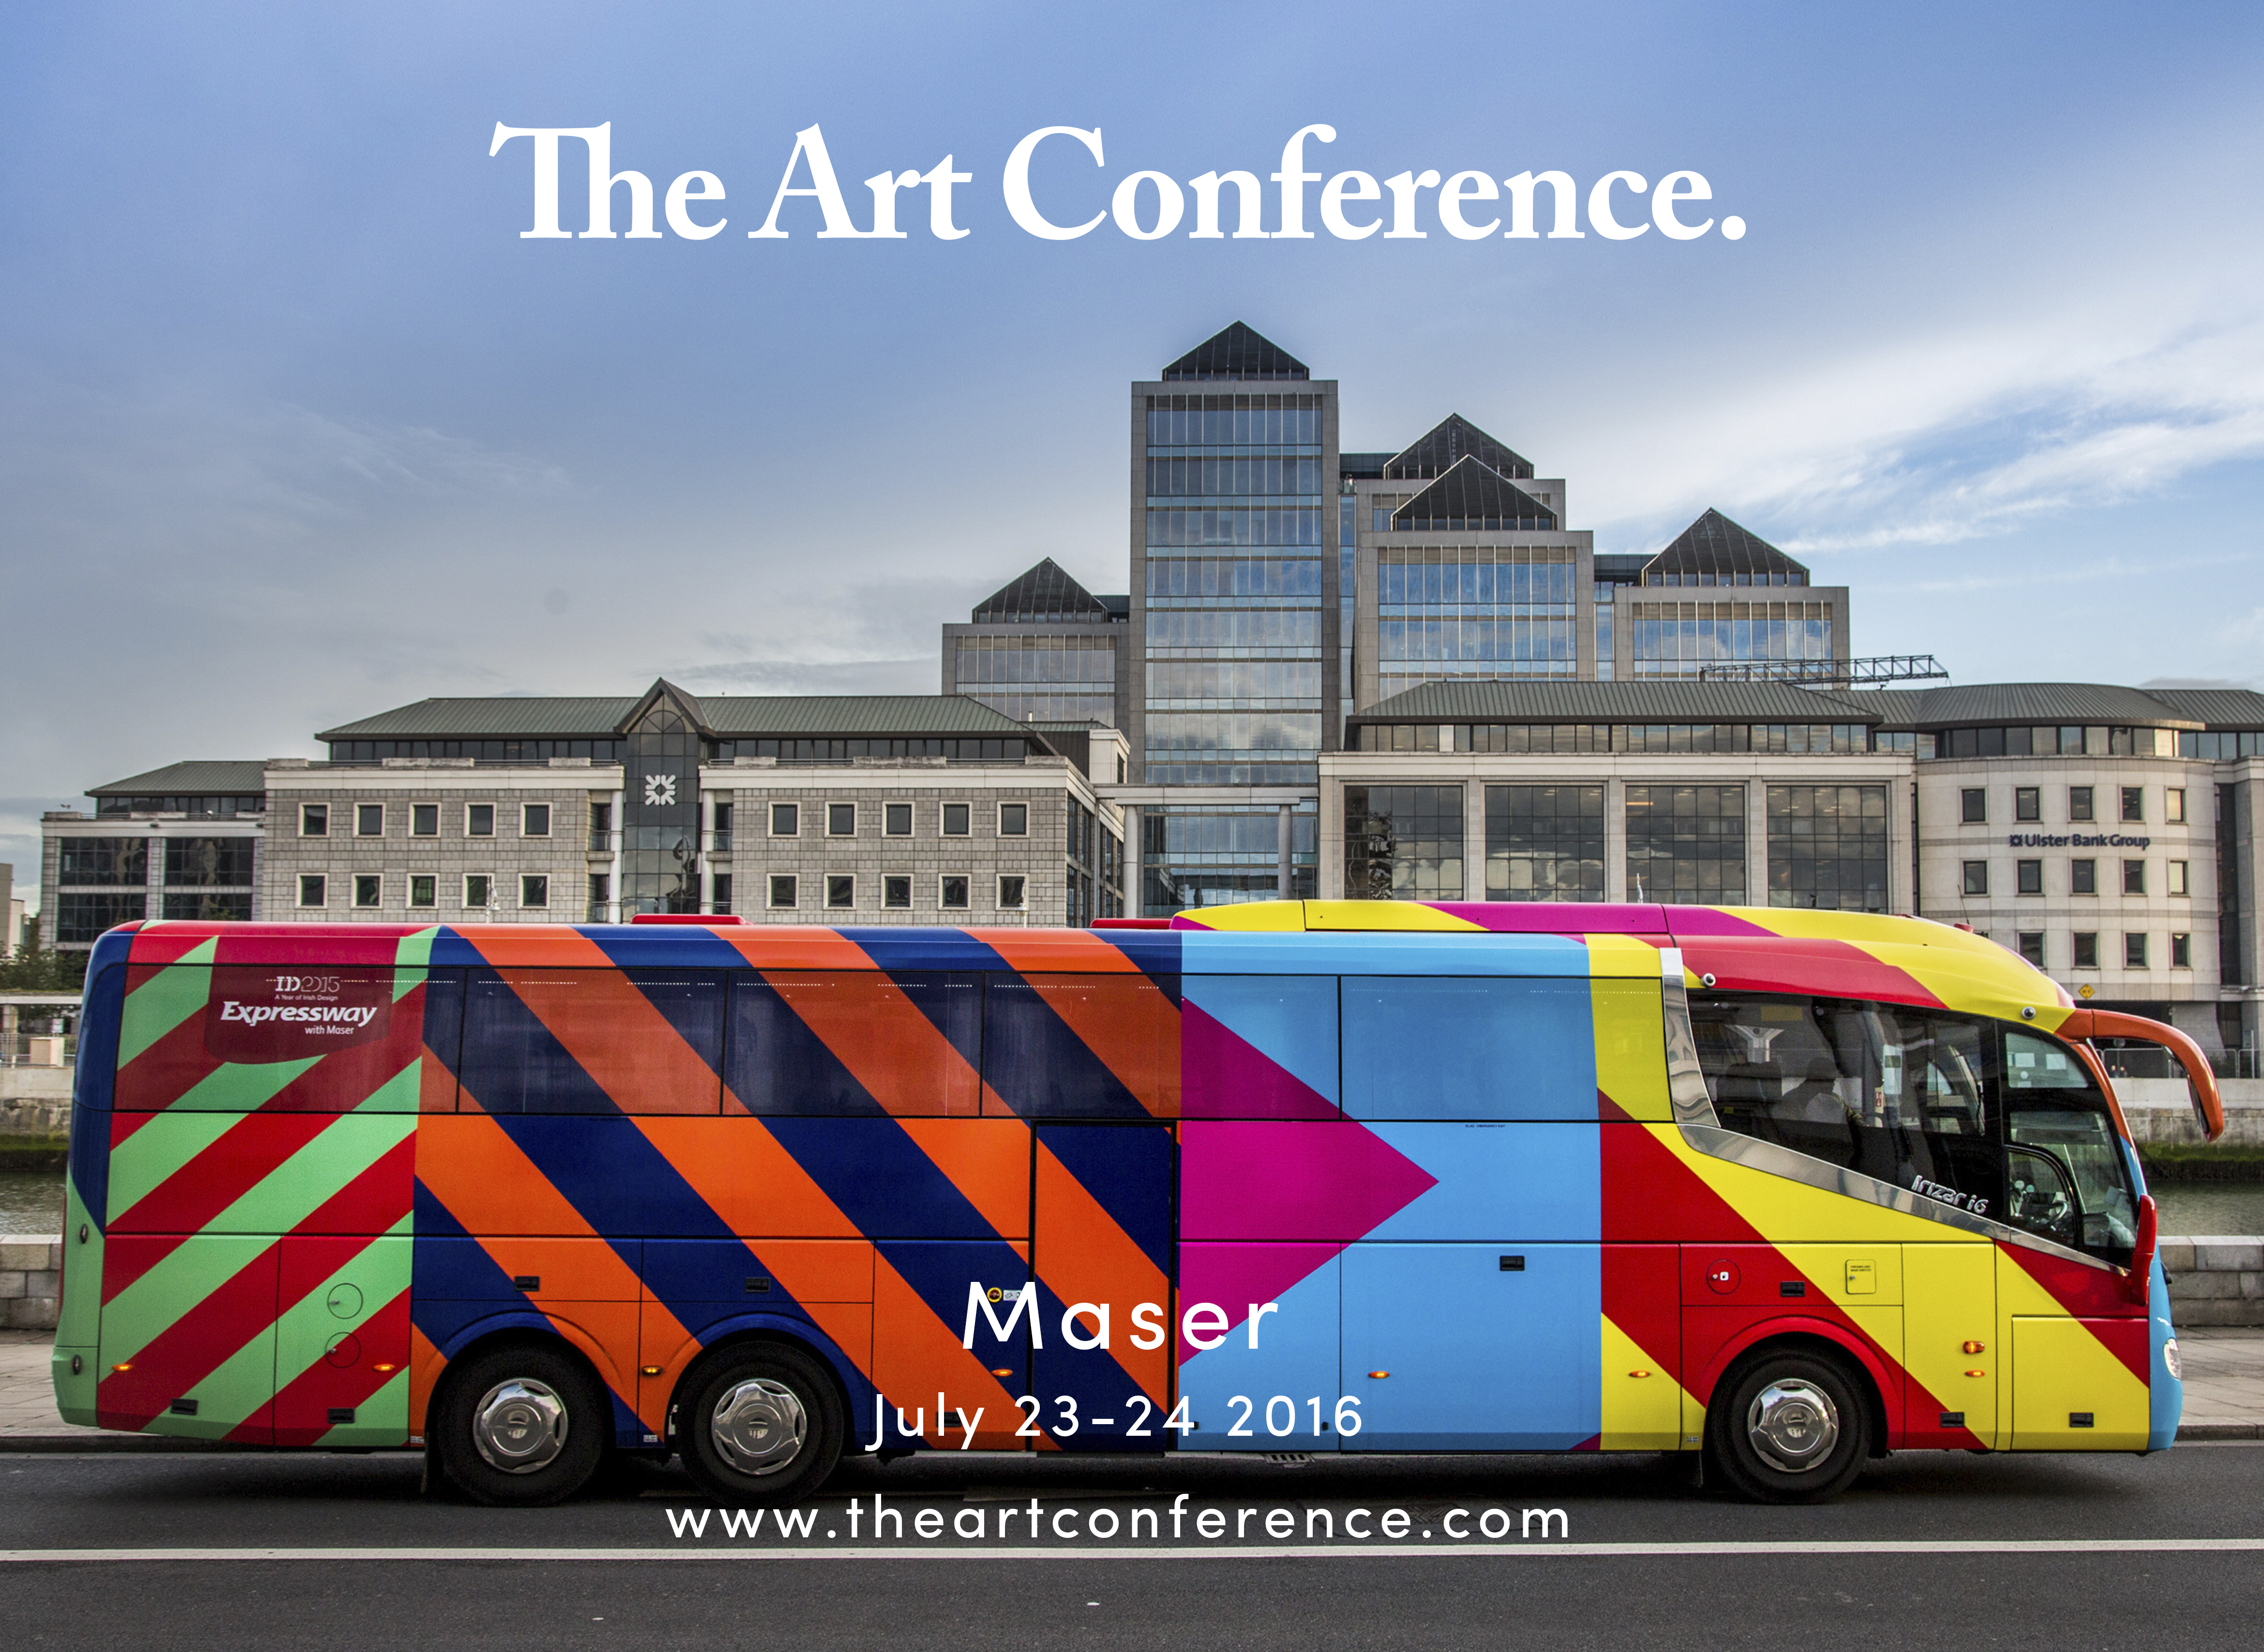 The Art Conference